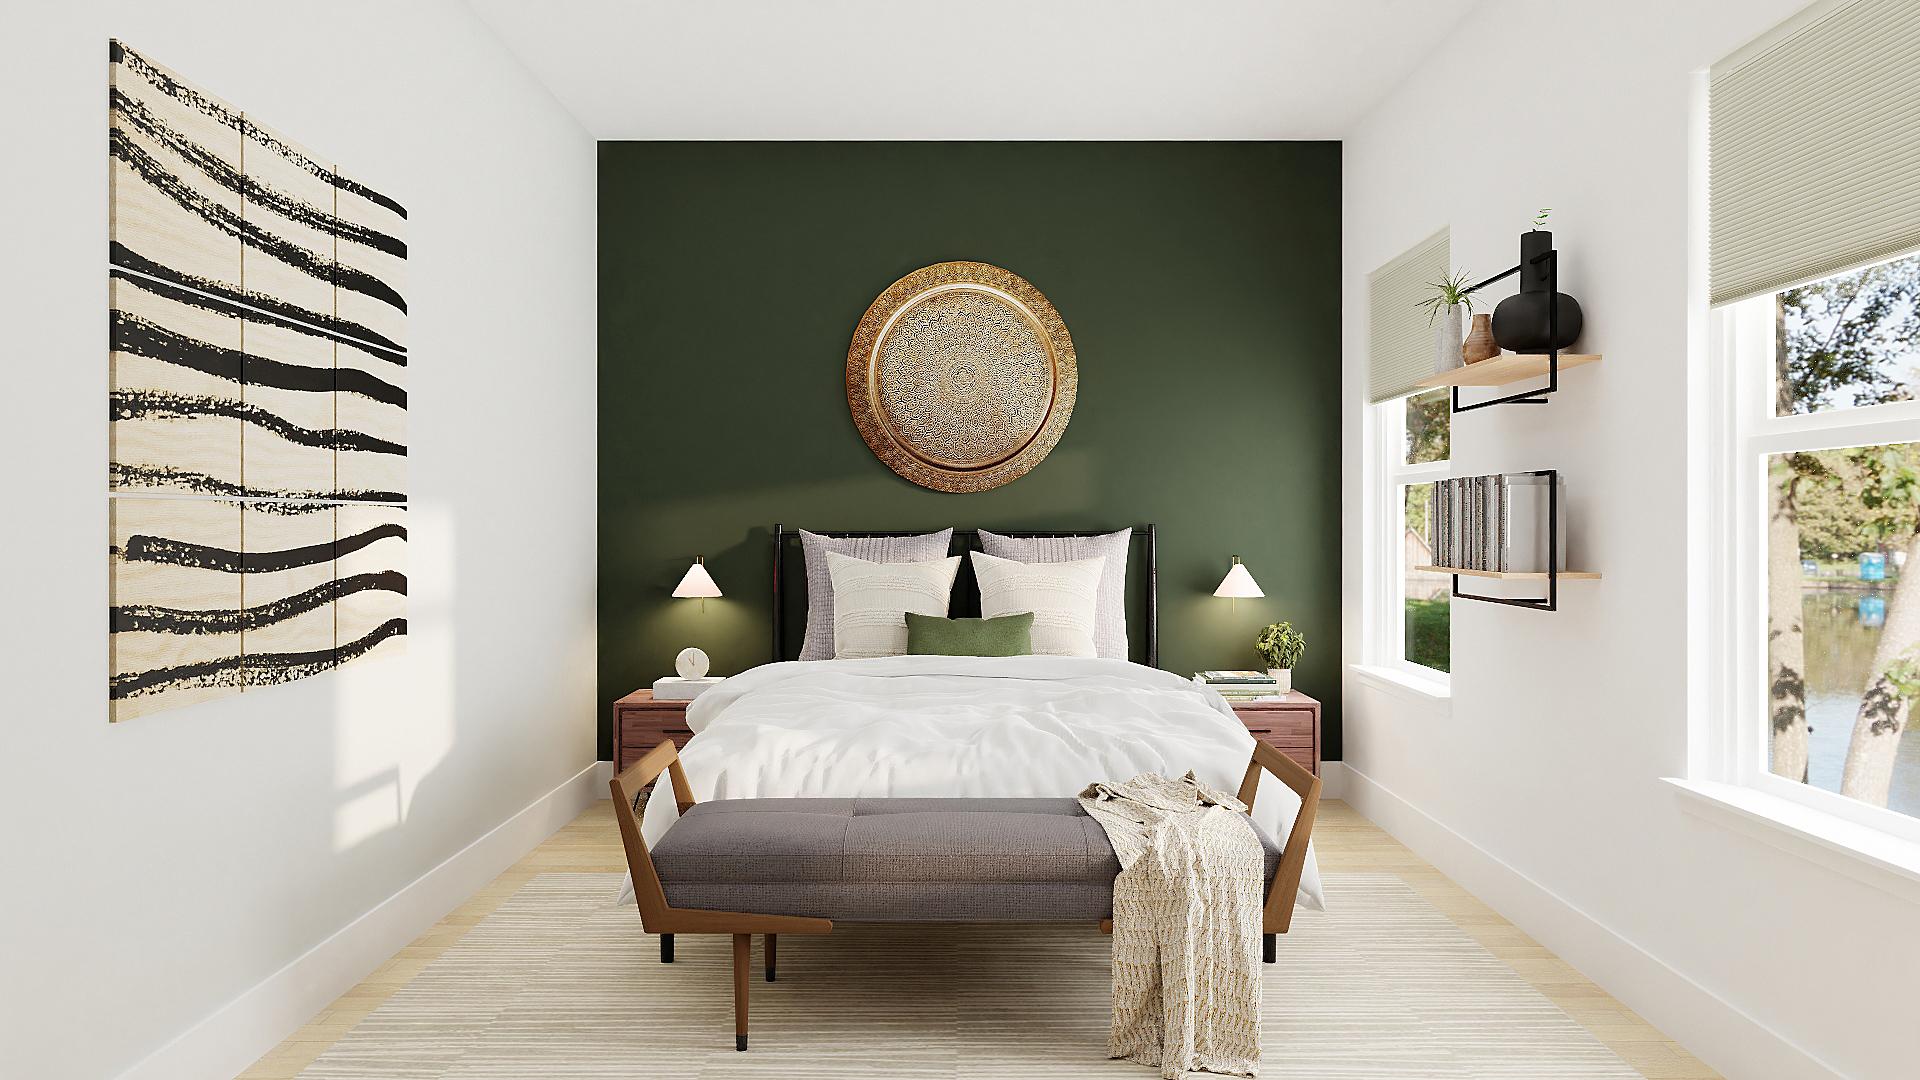 An Emerald Green Accent Wall In A Mid-Century Bedroom